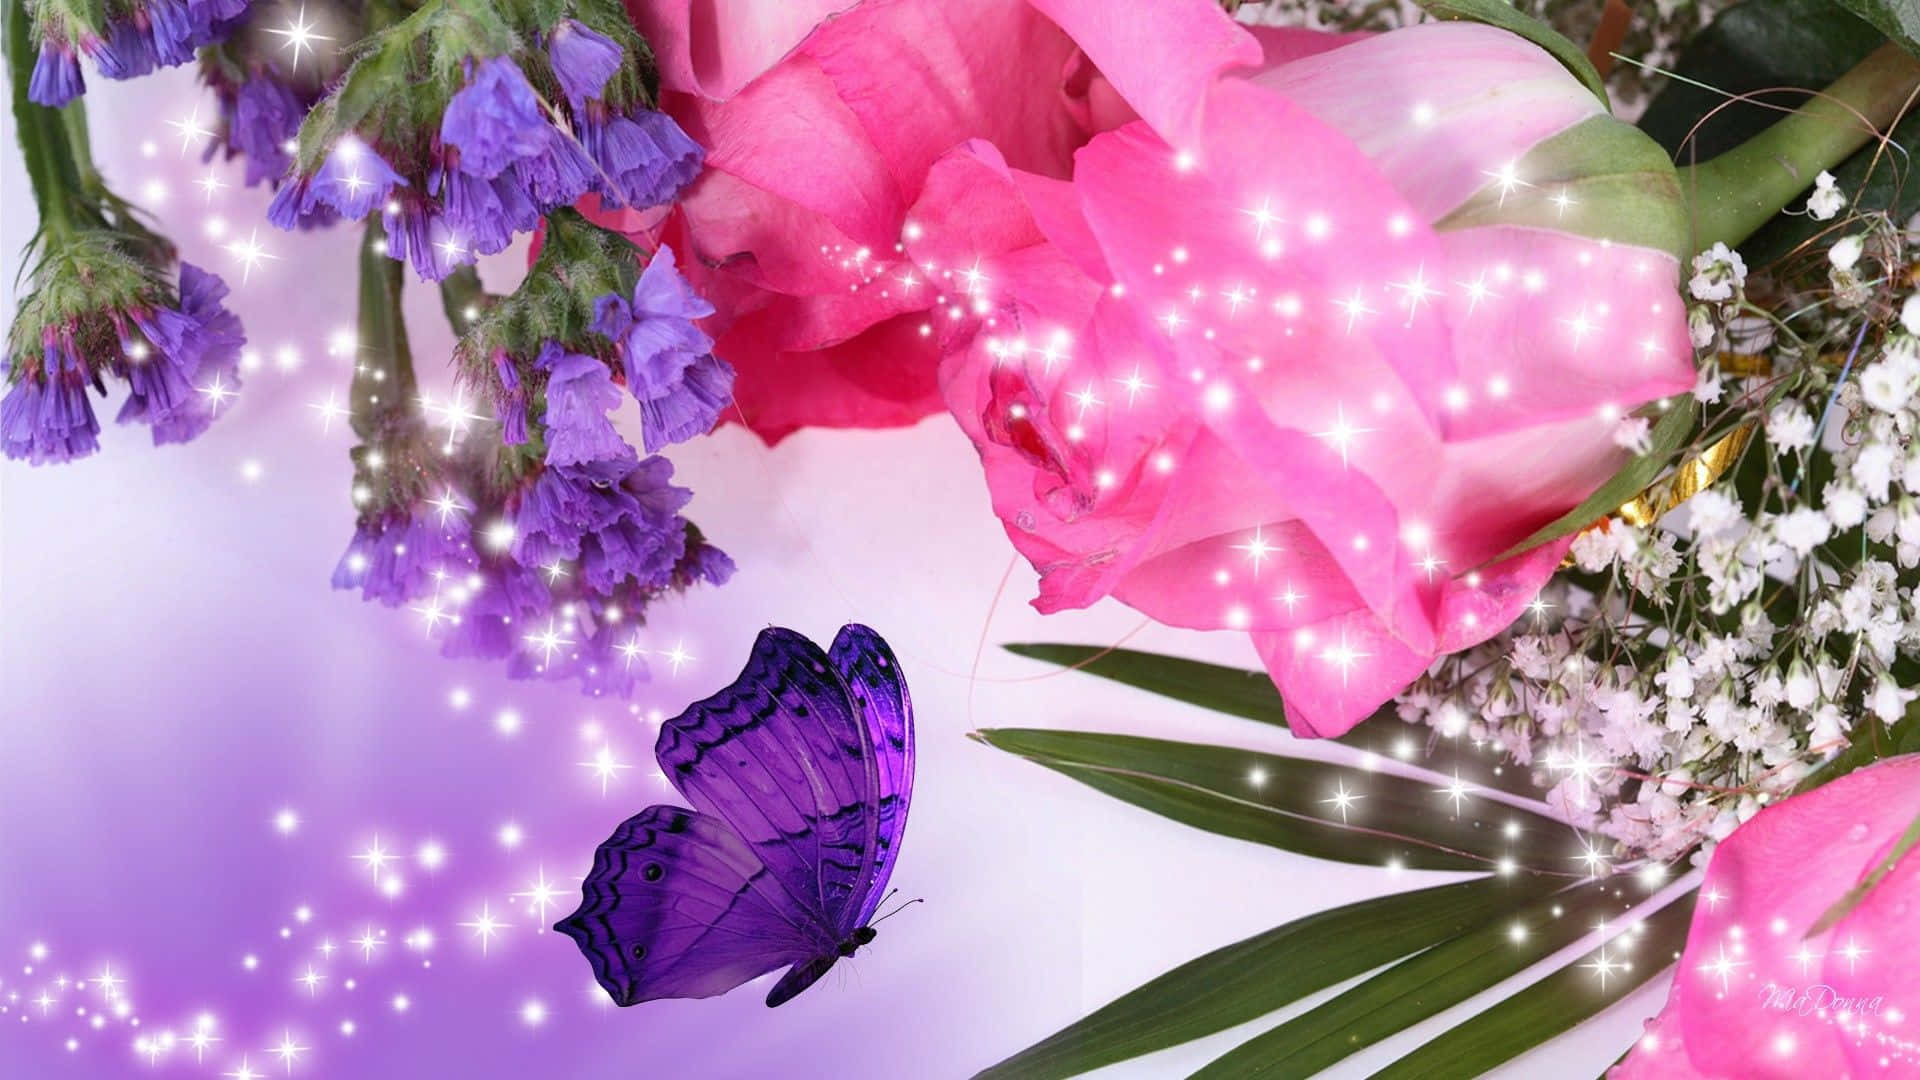 Download A Purple Flower With A Butterfly And Some Sparkles ...